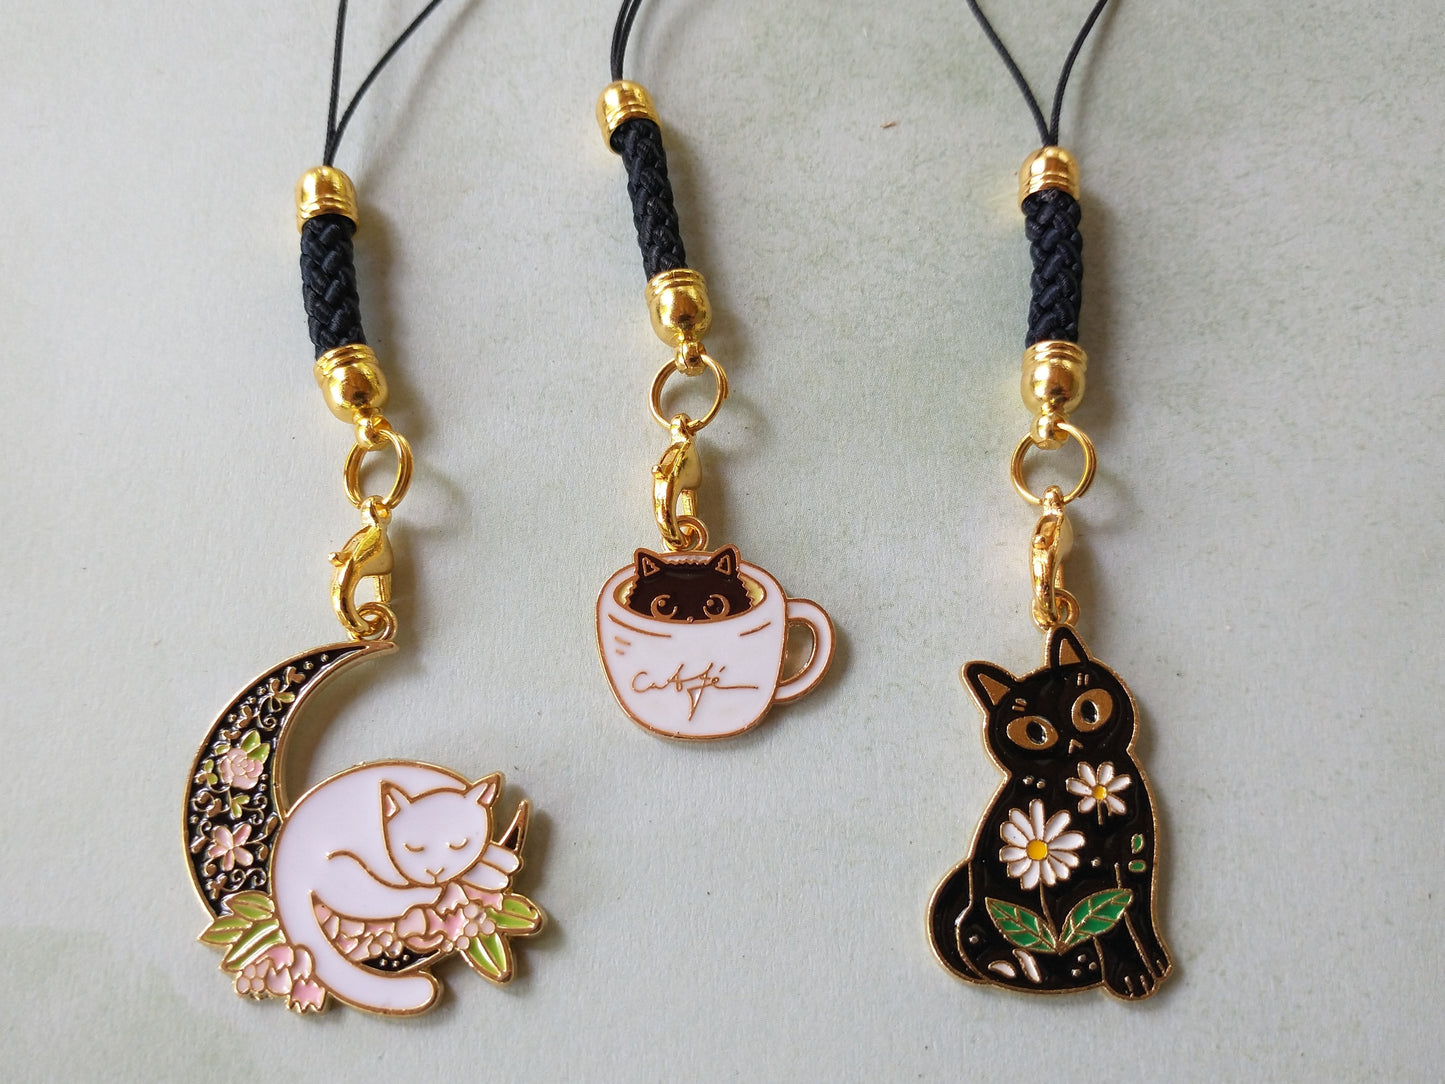 Fancy Kitty Woven Cord Charms